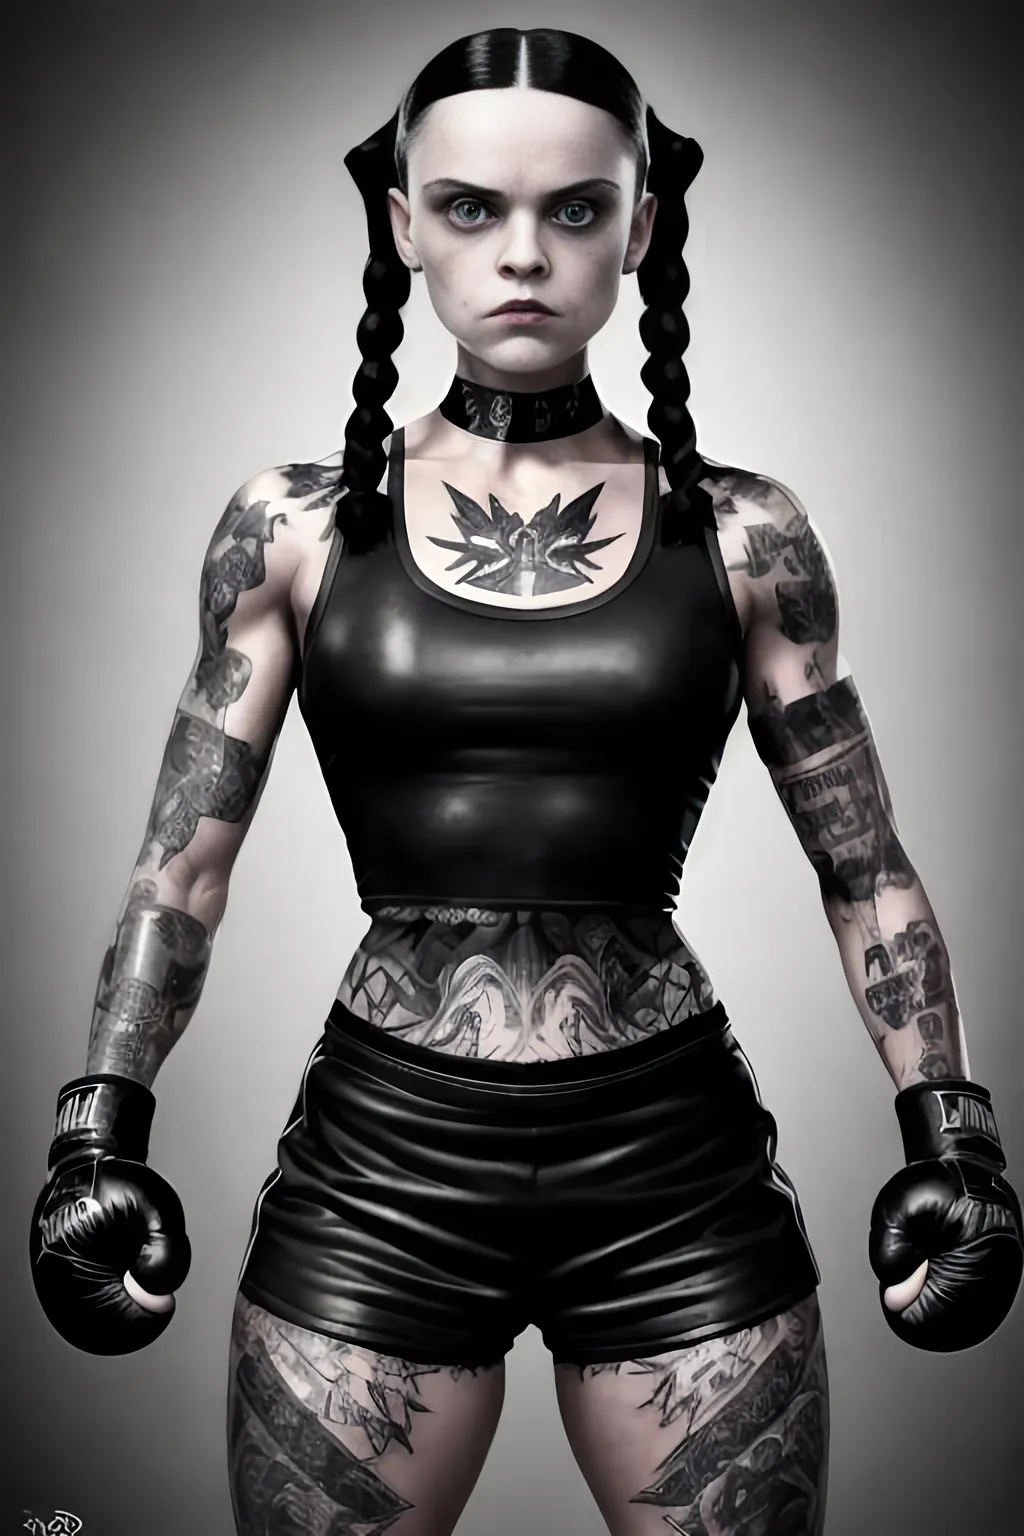 Wednesday Addams as a hot fit boxing woman, scrapper